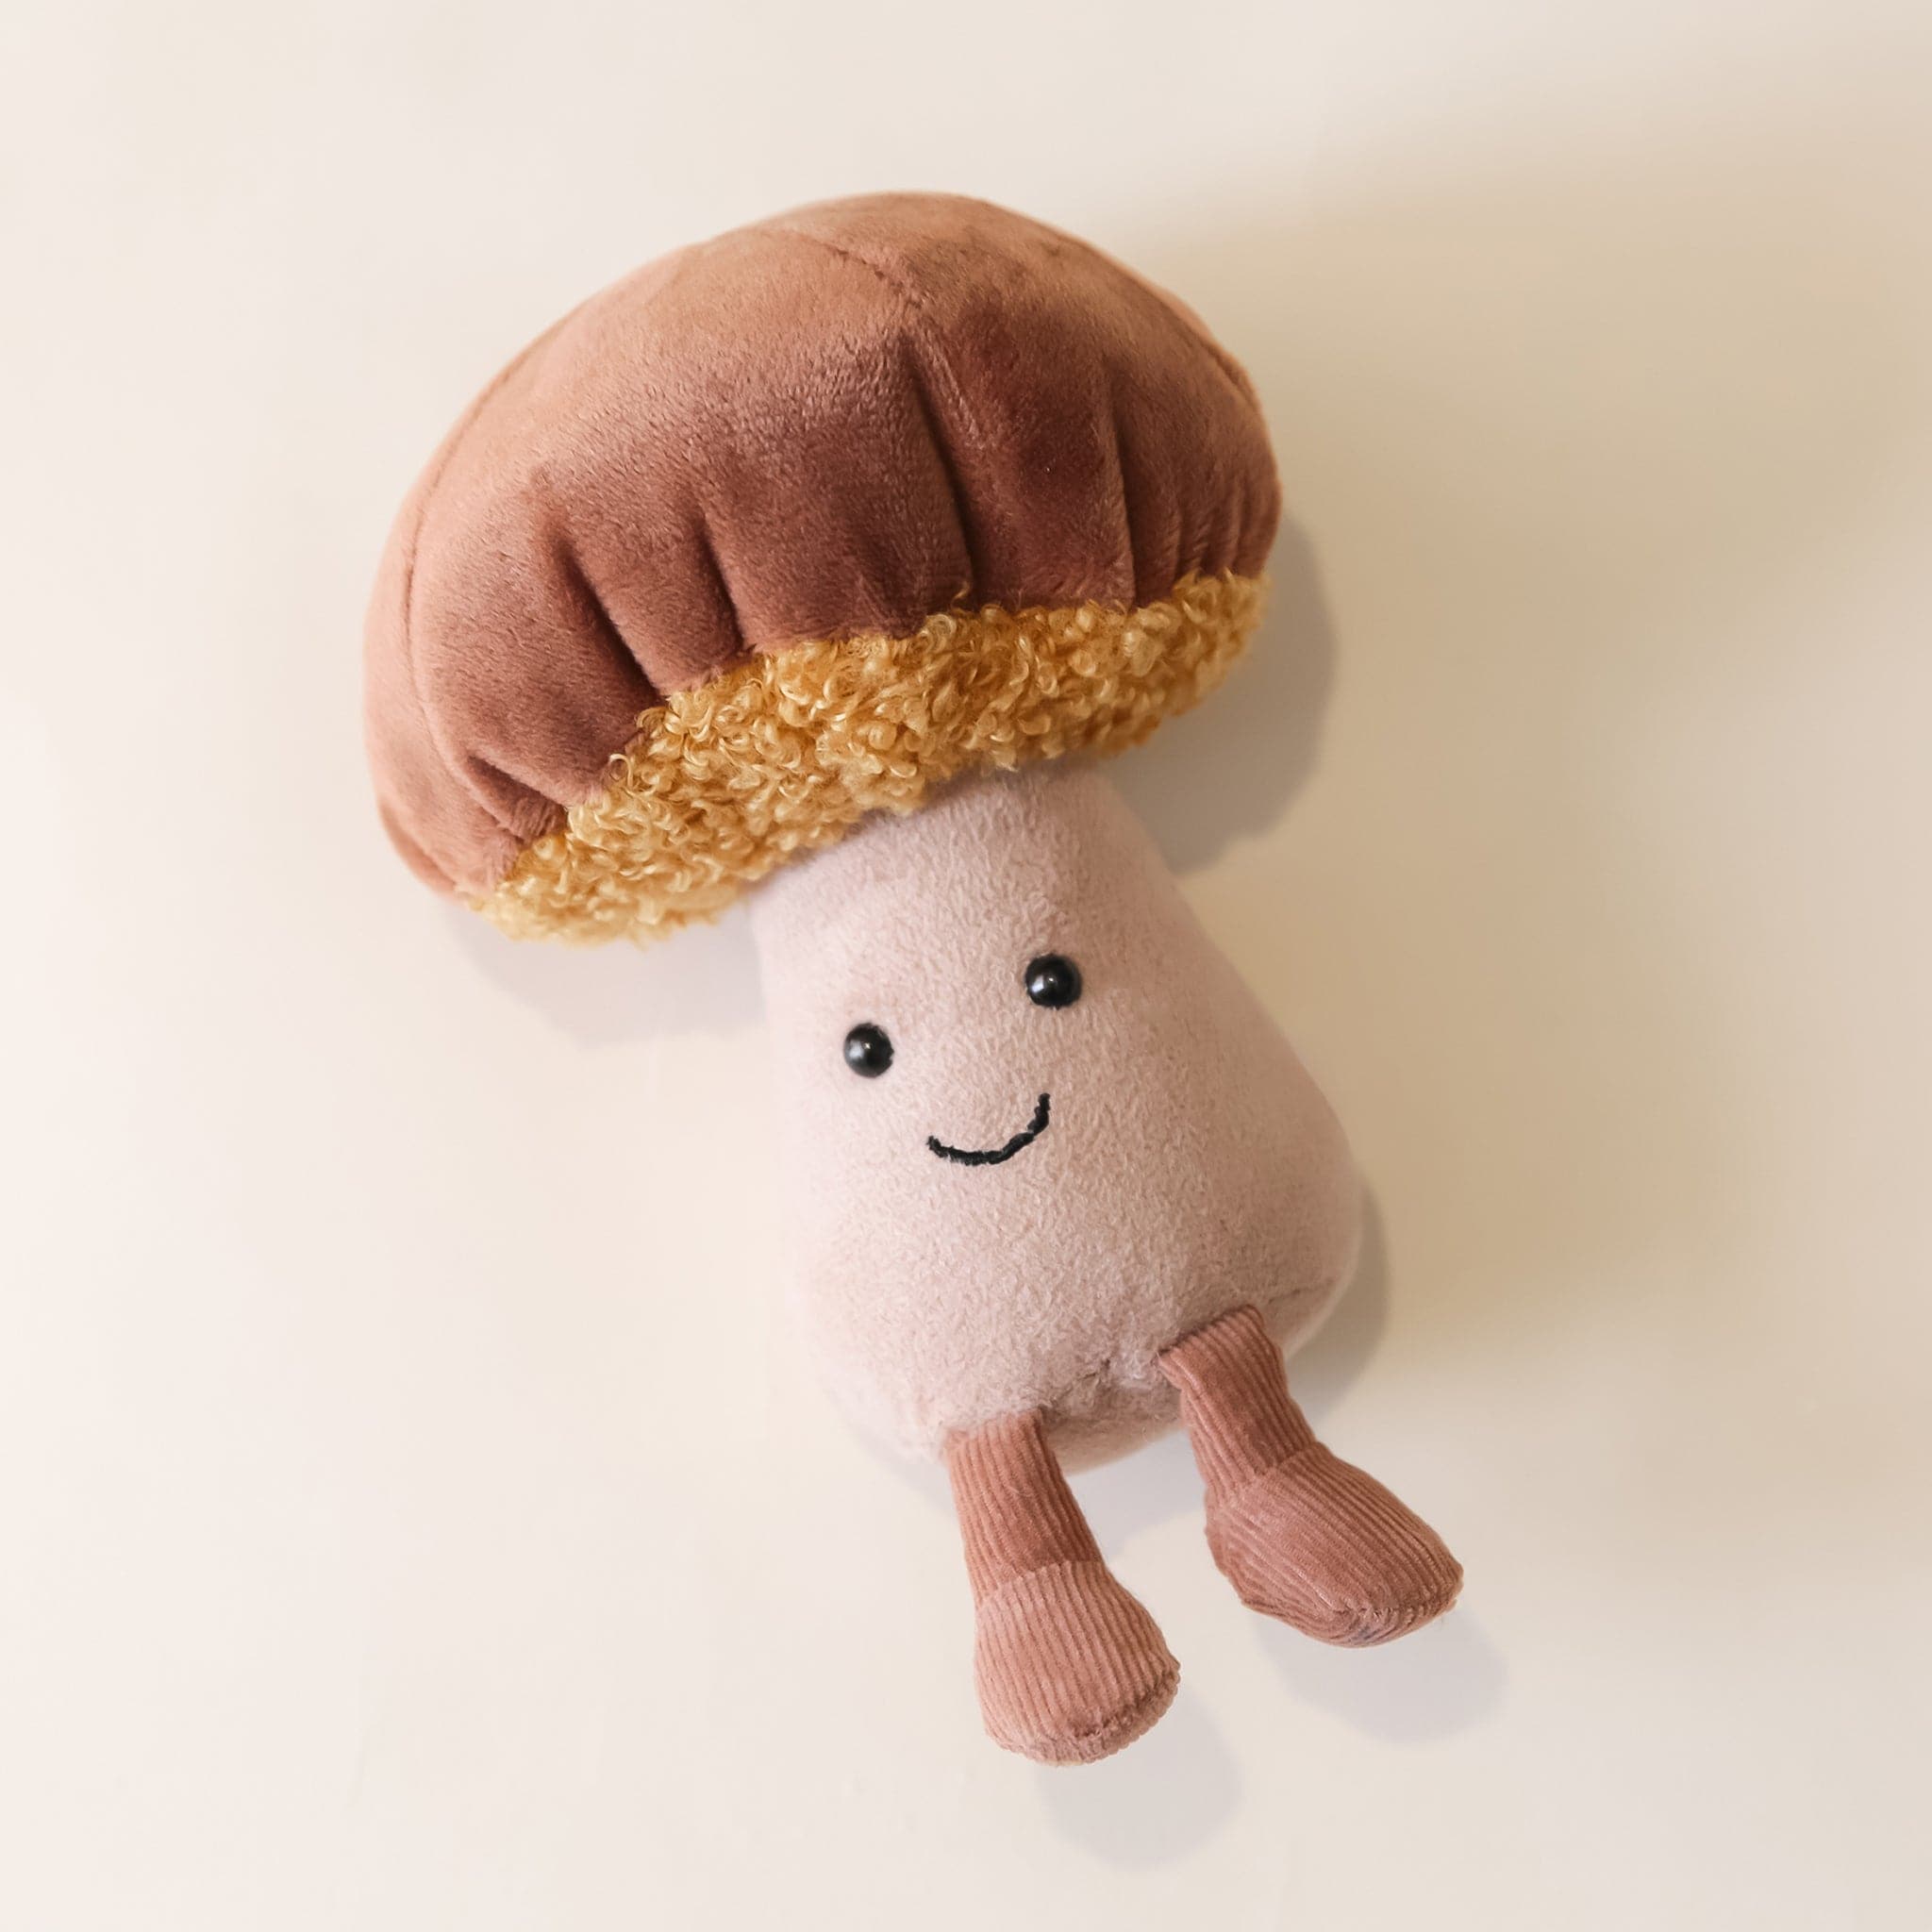 A soft suede stuffed animal in the shape of a mushroom with light brown cap with curly soft gold underneath, a tan colored stalk with smiley face and brown floppy legs.